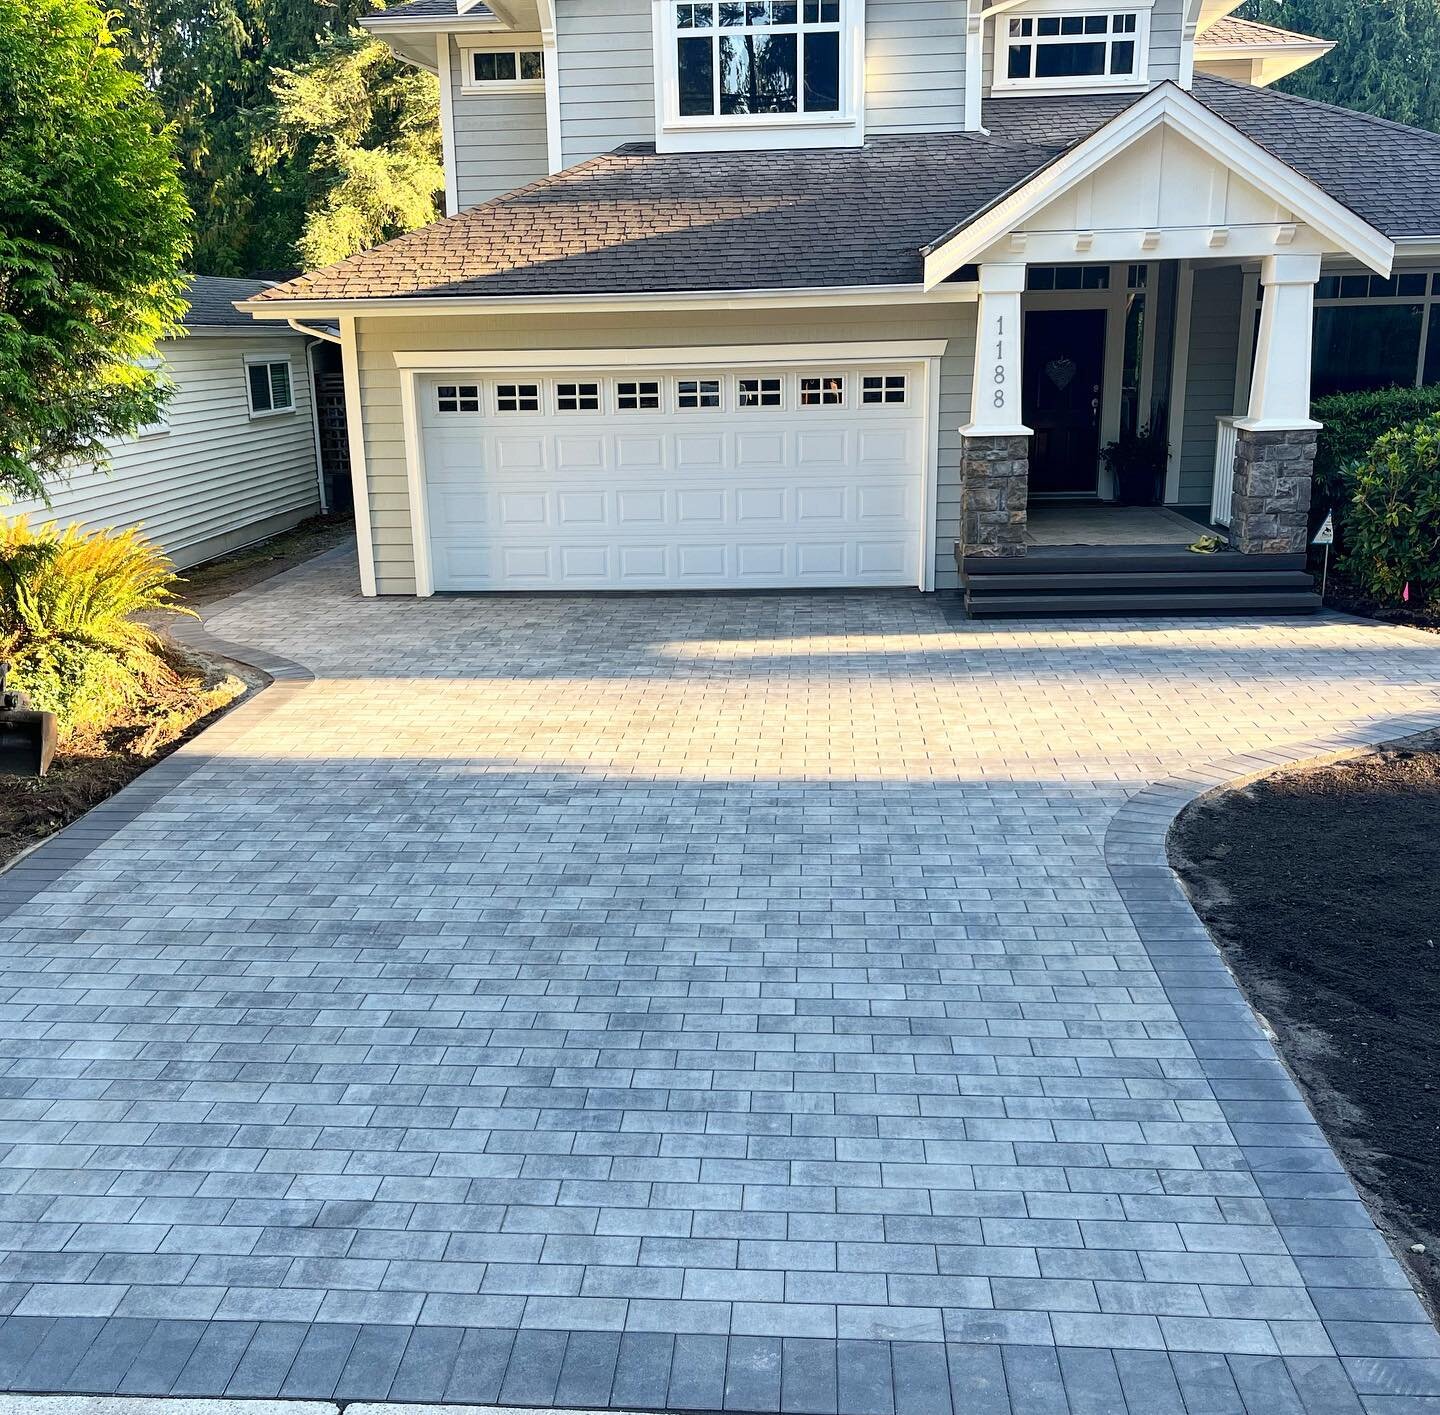 New driveway in pemberton heights installed, excavated and prepped in 3 days. Plus an elegant back patio. #newstone #pavers #mountainscape #howtohardscape #driveway #northvan #lonsdale #westvan #pnw #igers #tbt #vancouver #canada #landscaping #paving